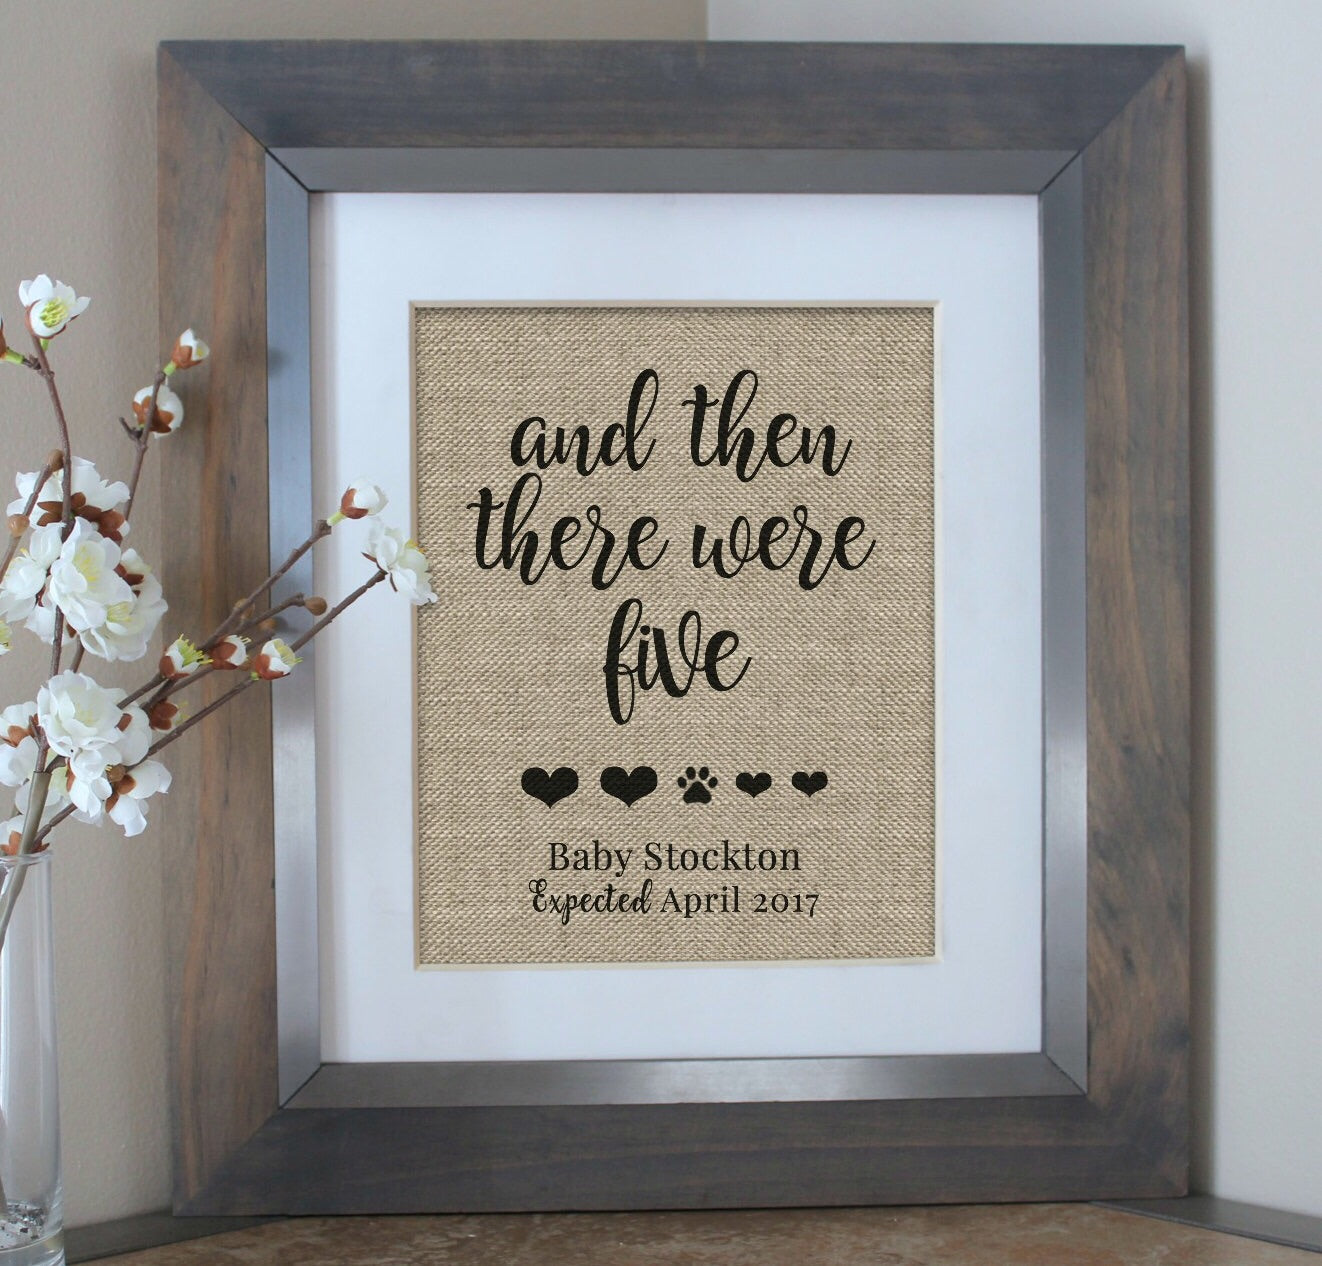 Then There Were Four Pregnancy Announcement – Valentine Heart